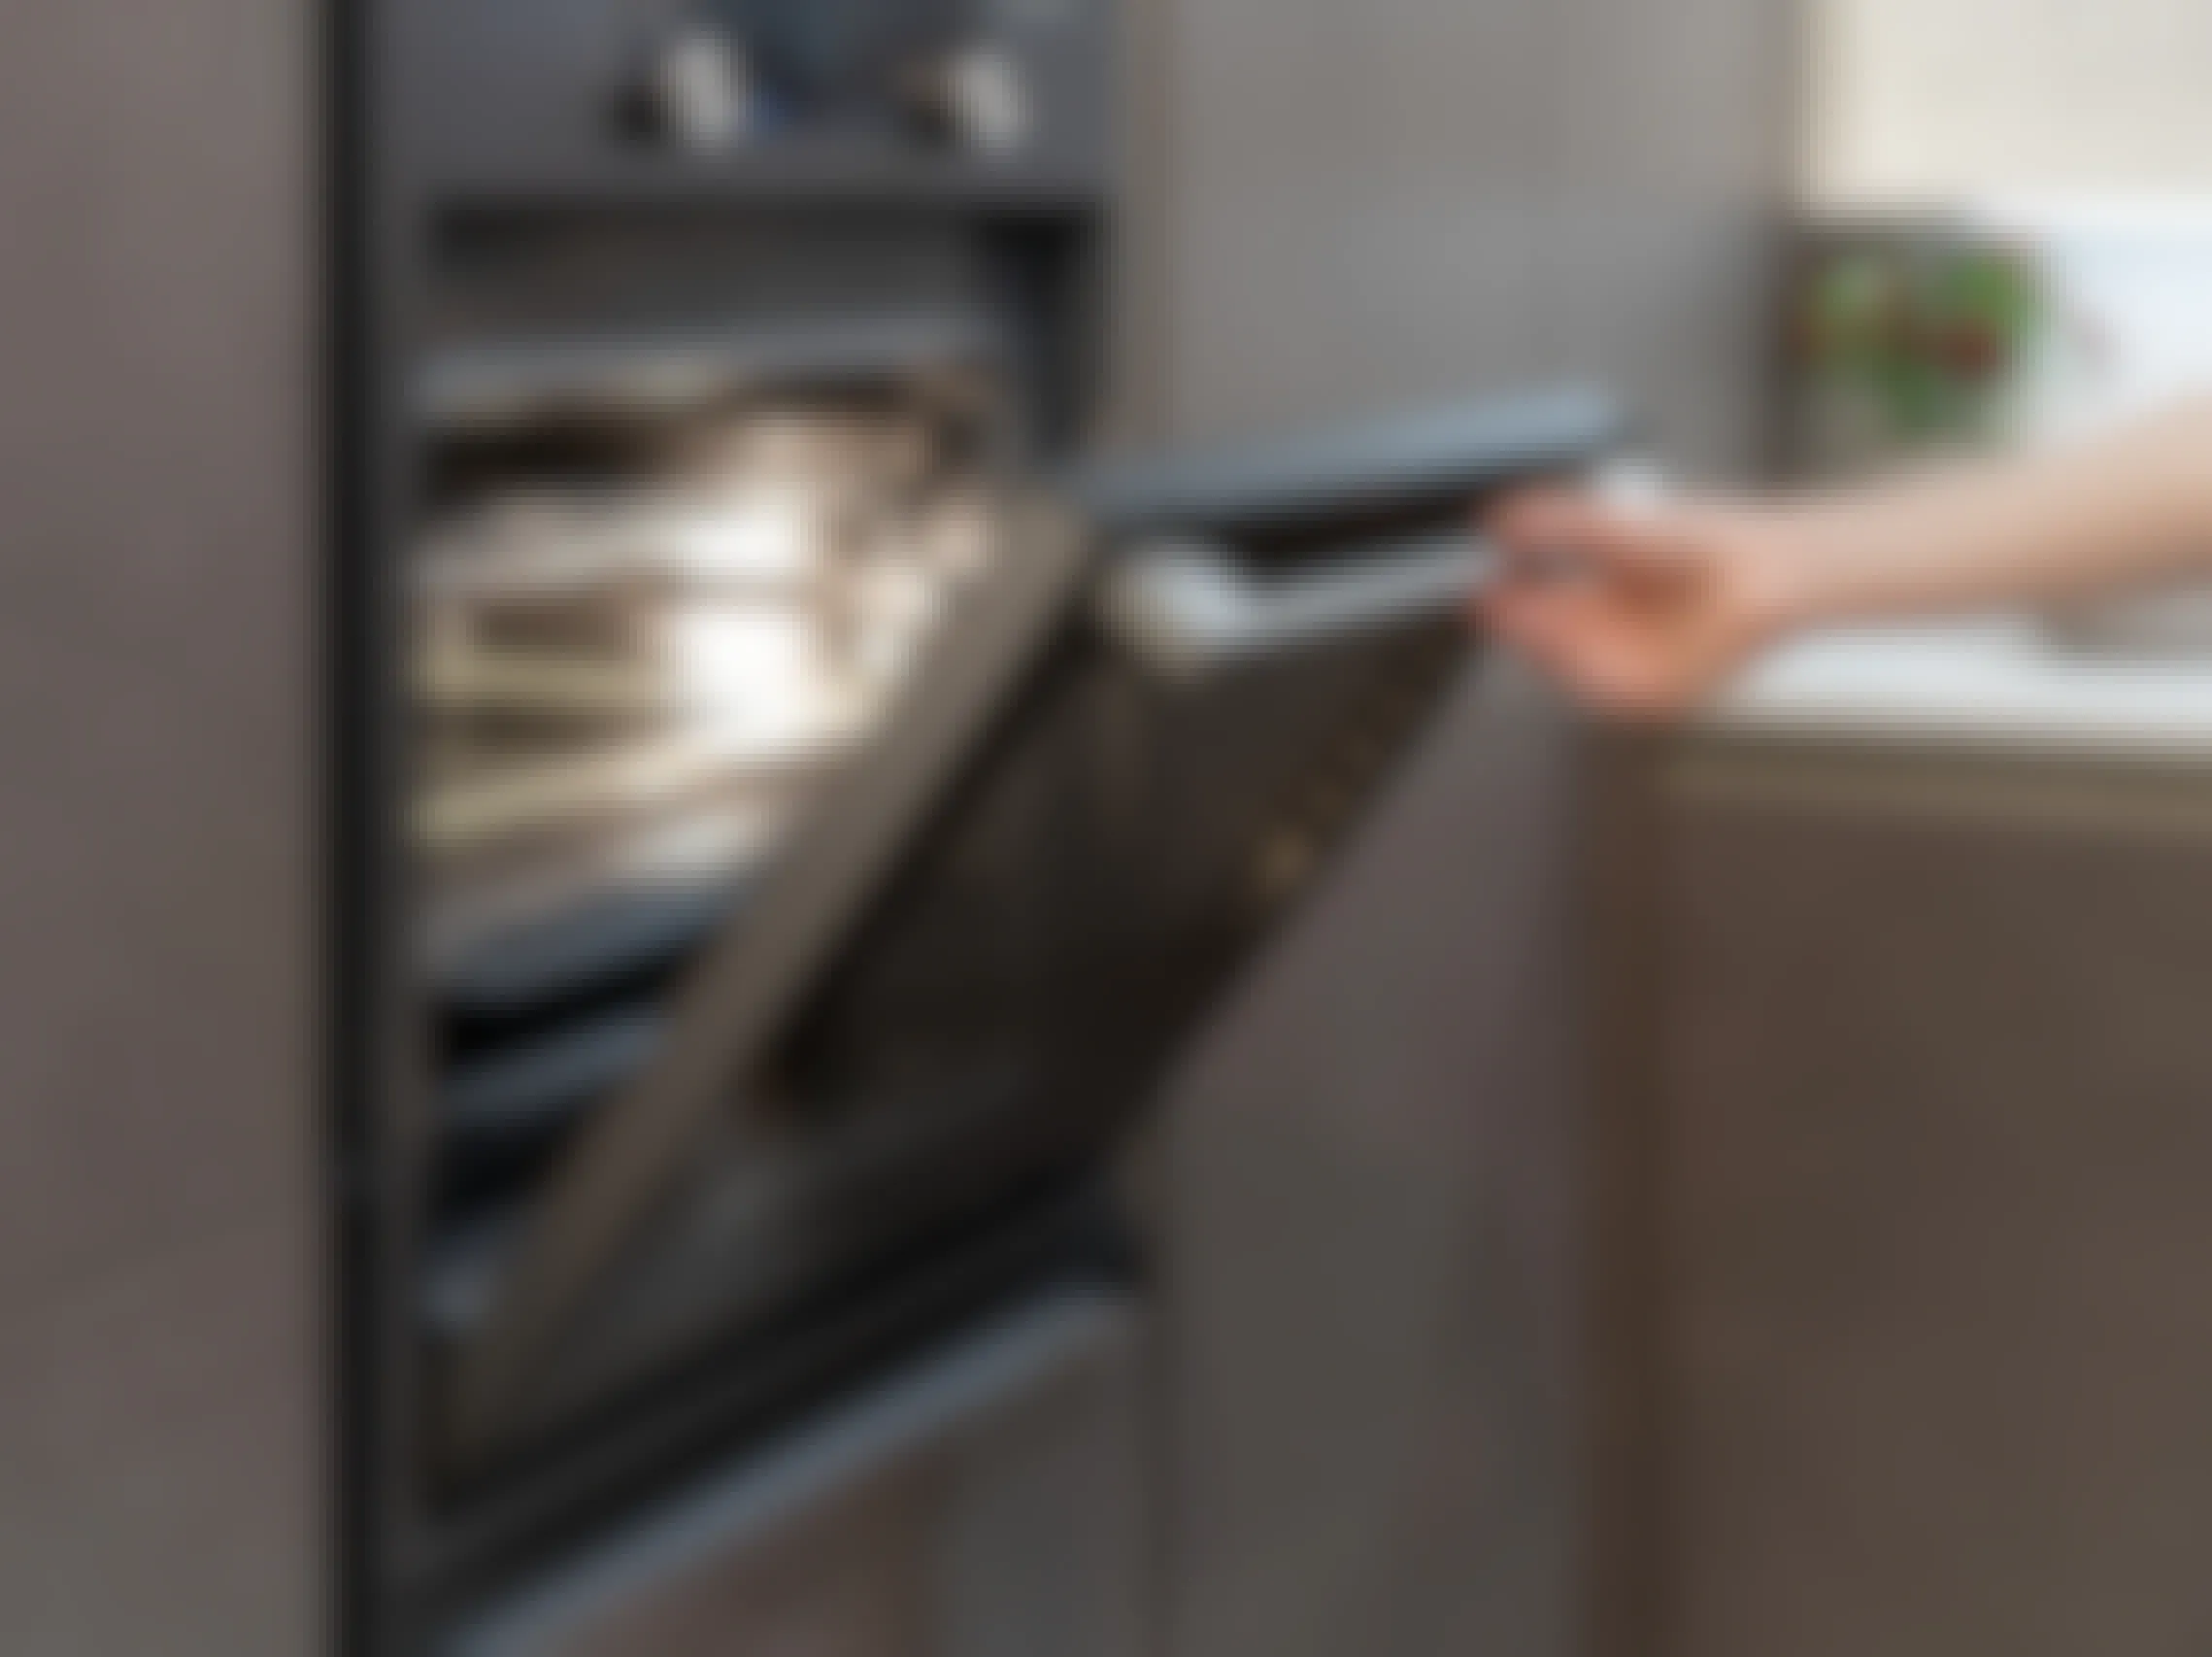 A person opening the door of their electric oven